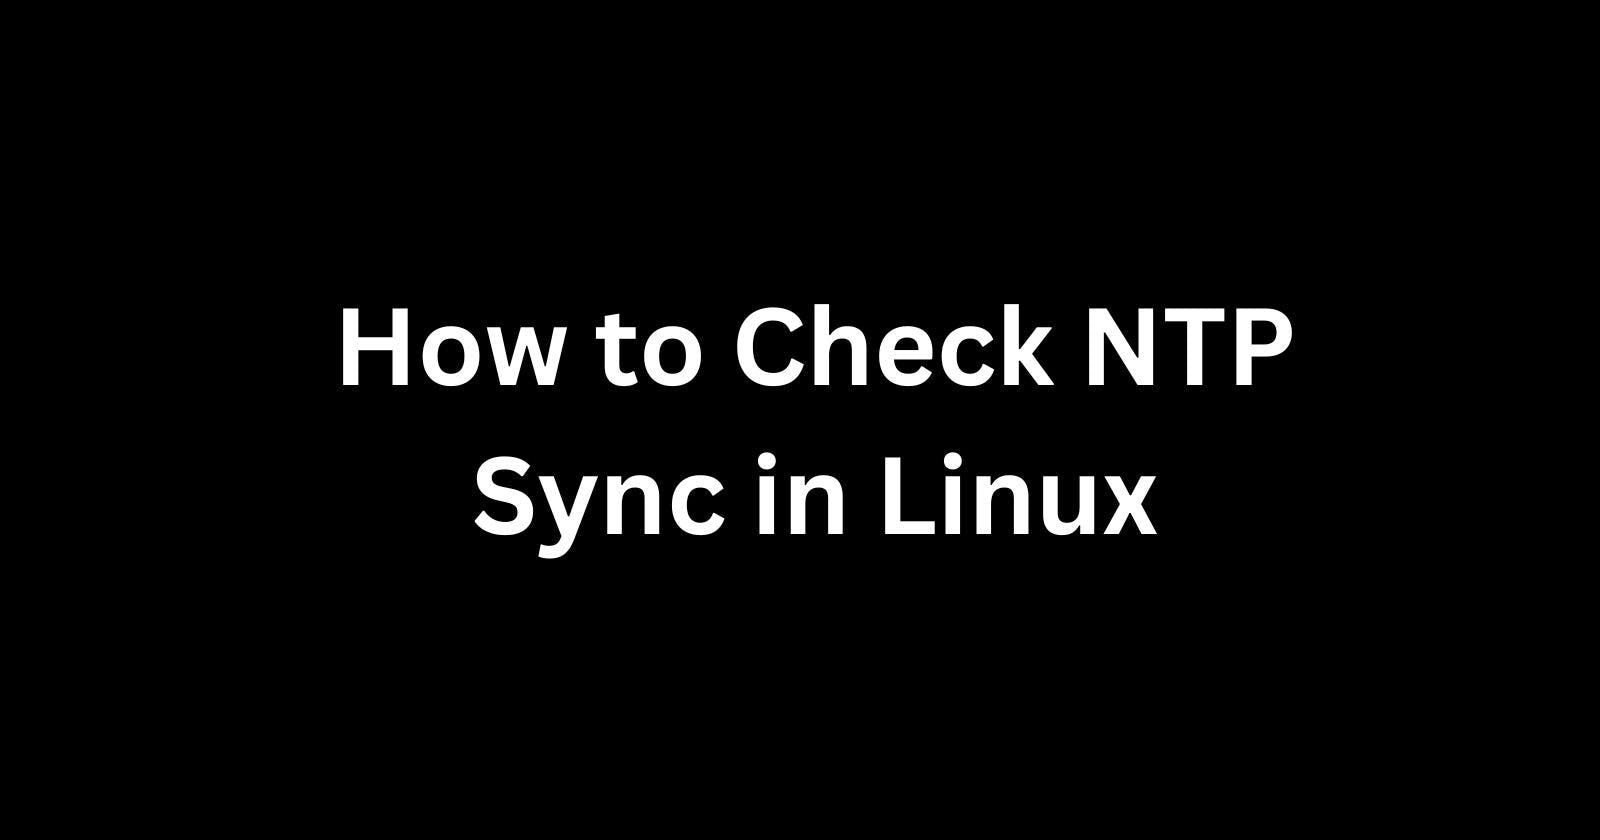 How to Check NTP Sync in Linux